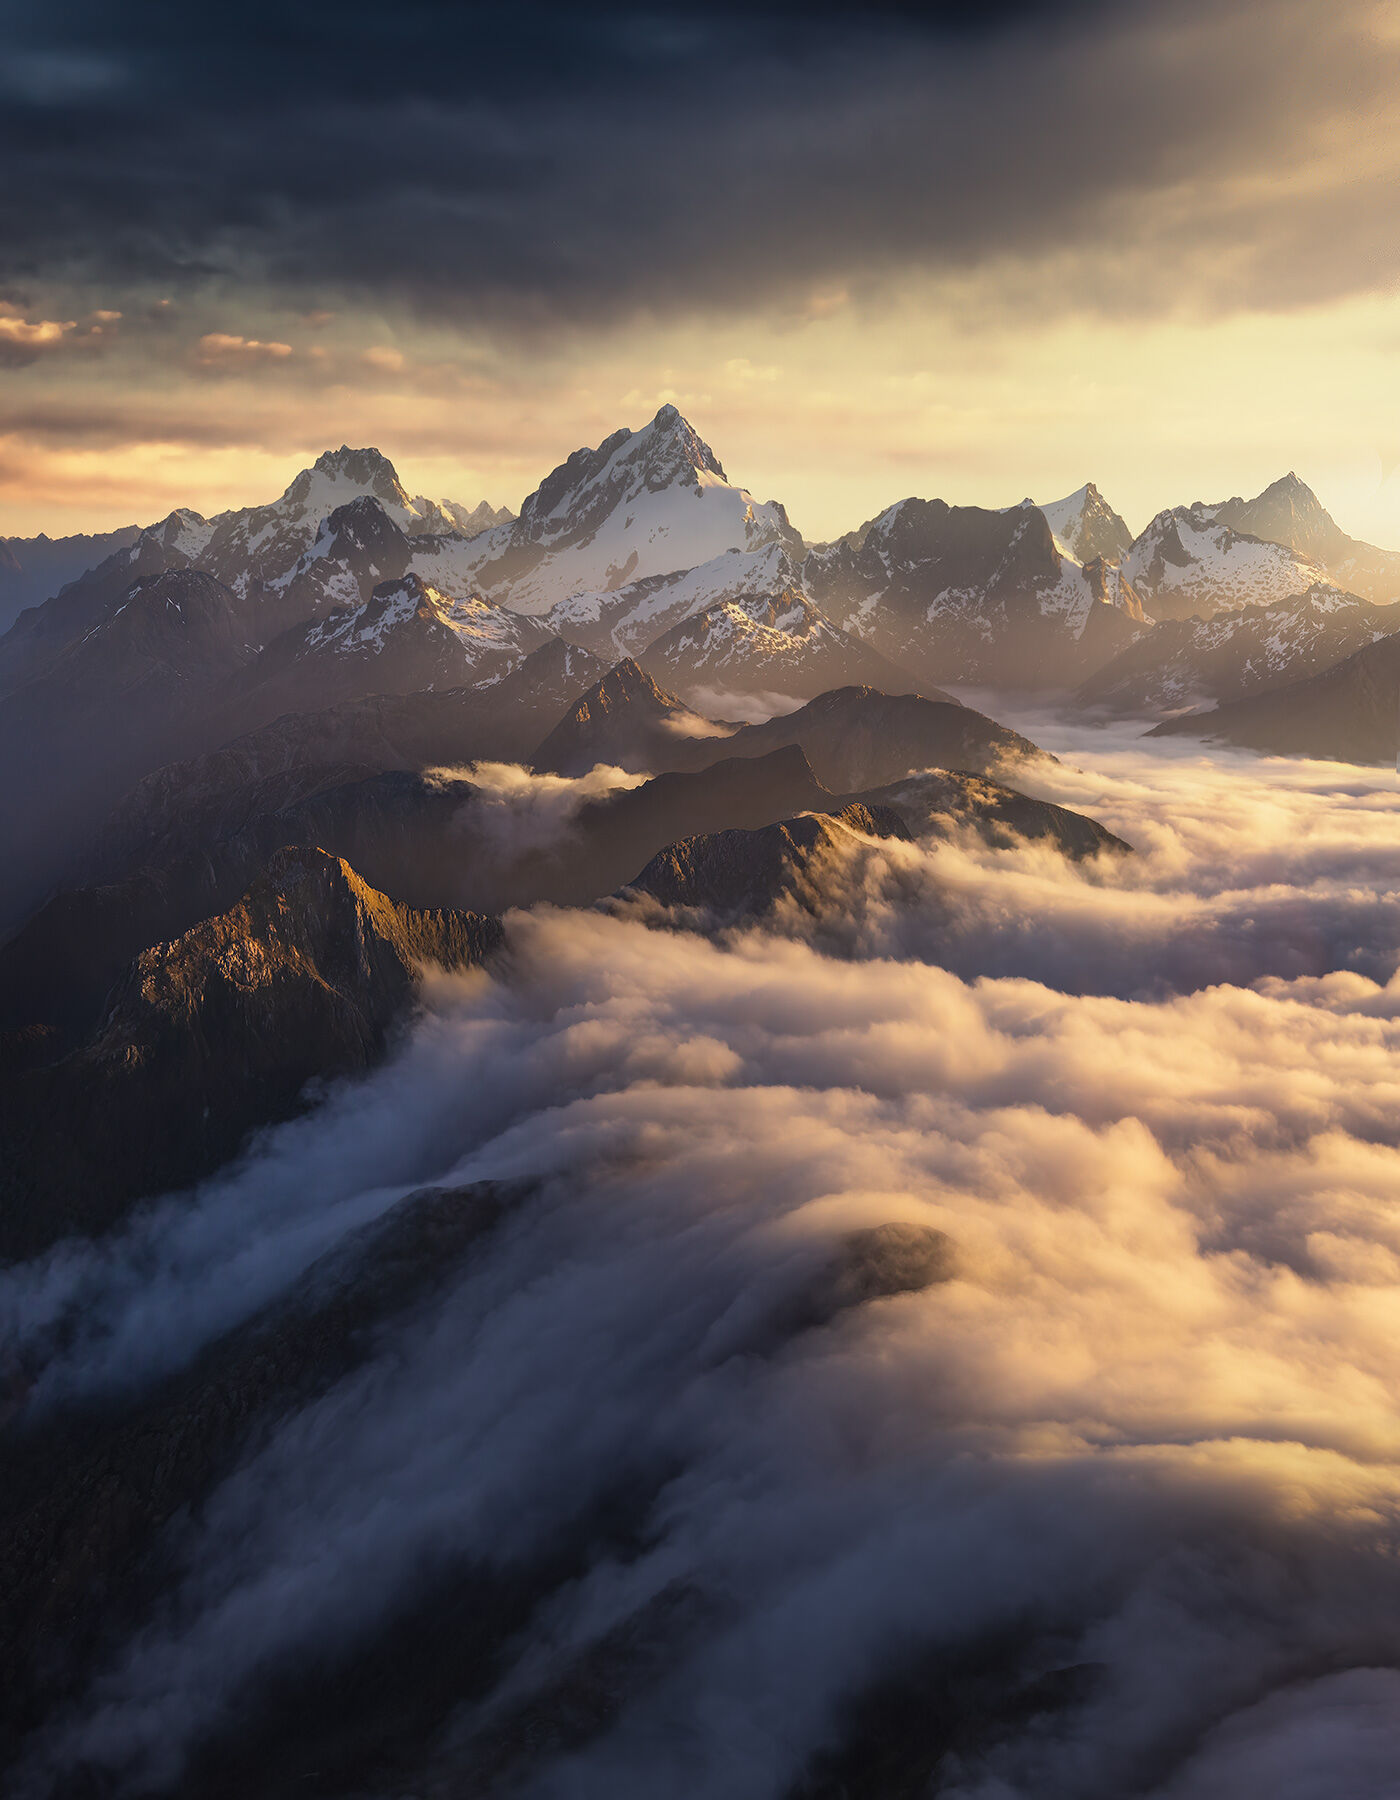 A cloudfall viewed from the air below the biggest peaks in Fiordland, New Zealand